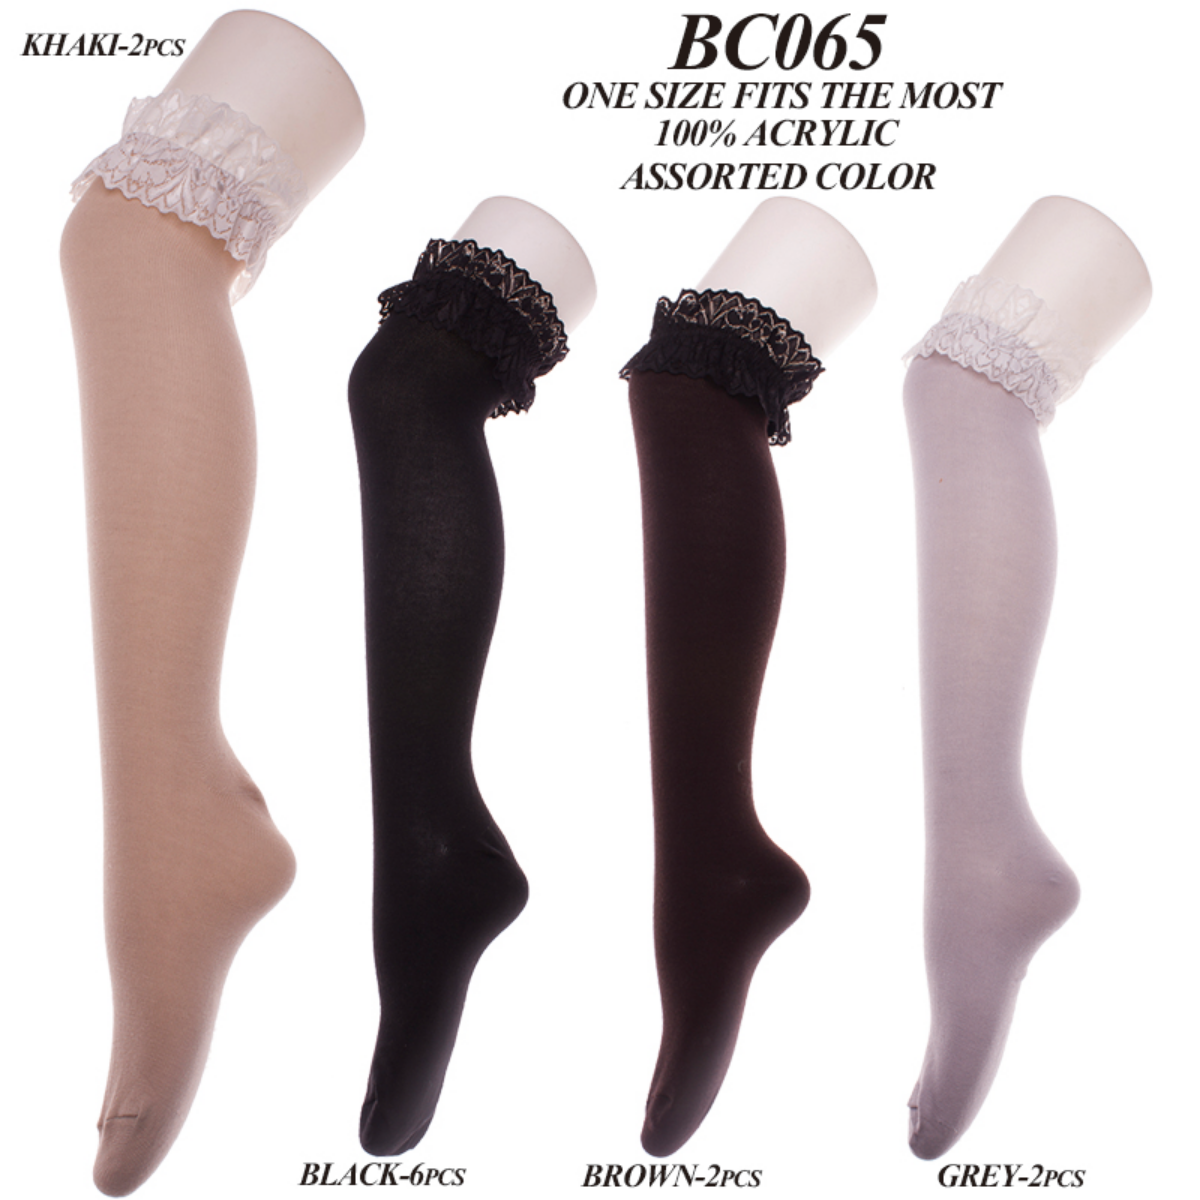 Solid Color Knee-High Stockings W/ Lace Trim - 12Pc Set